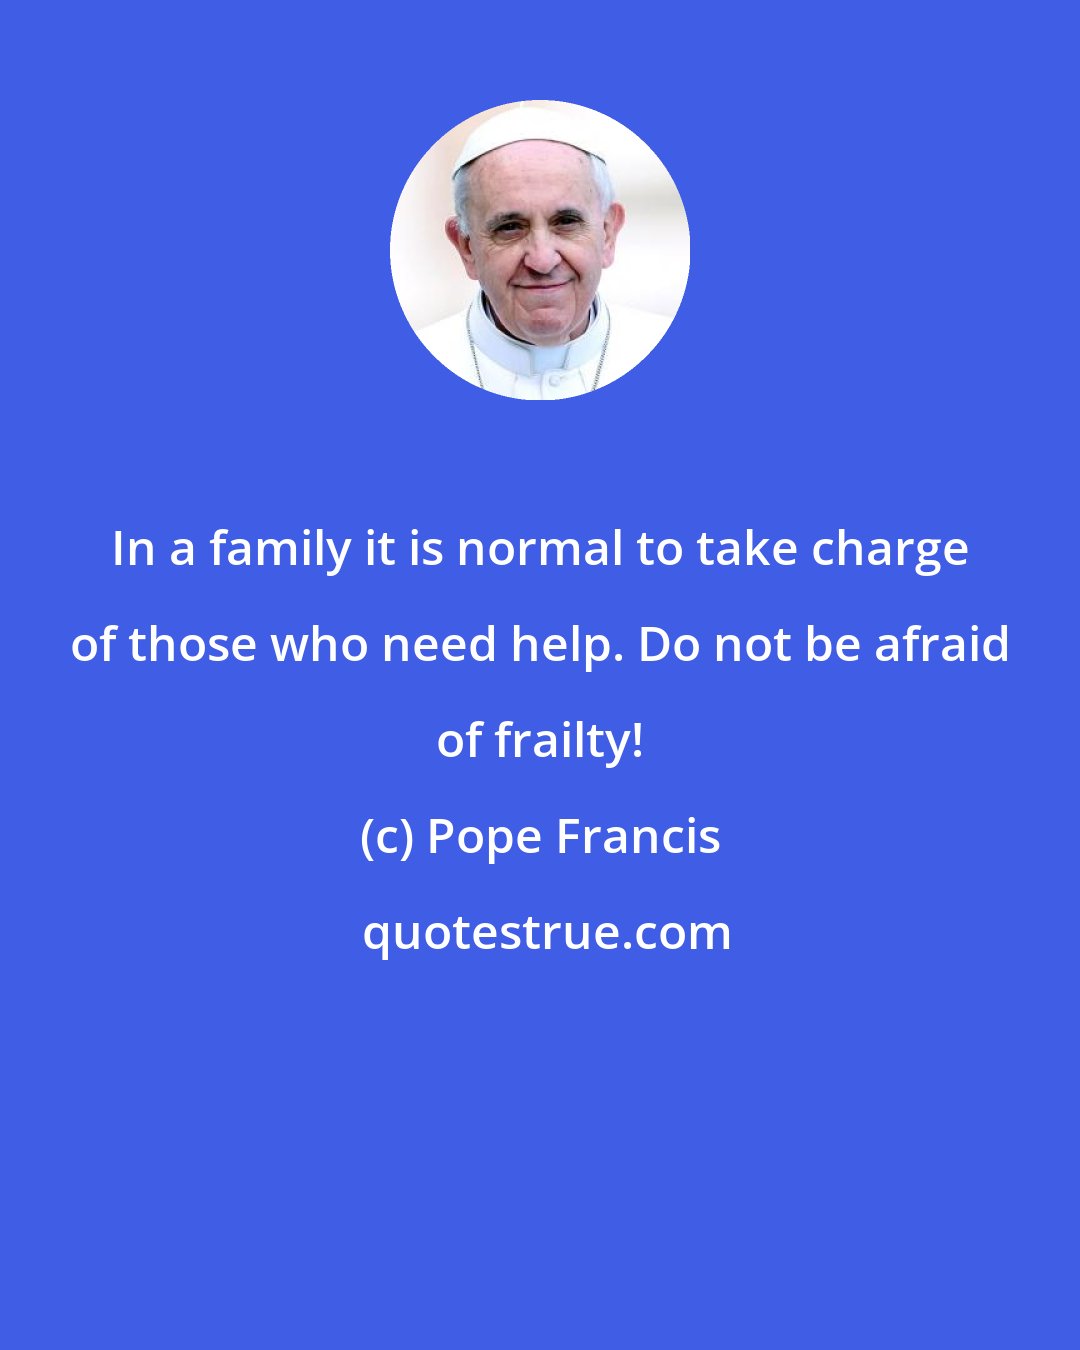 Pope Francis: In a family it is normal to take charge of those who need help. Do not be afraid of frailty!